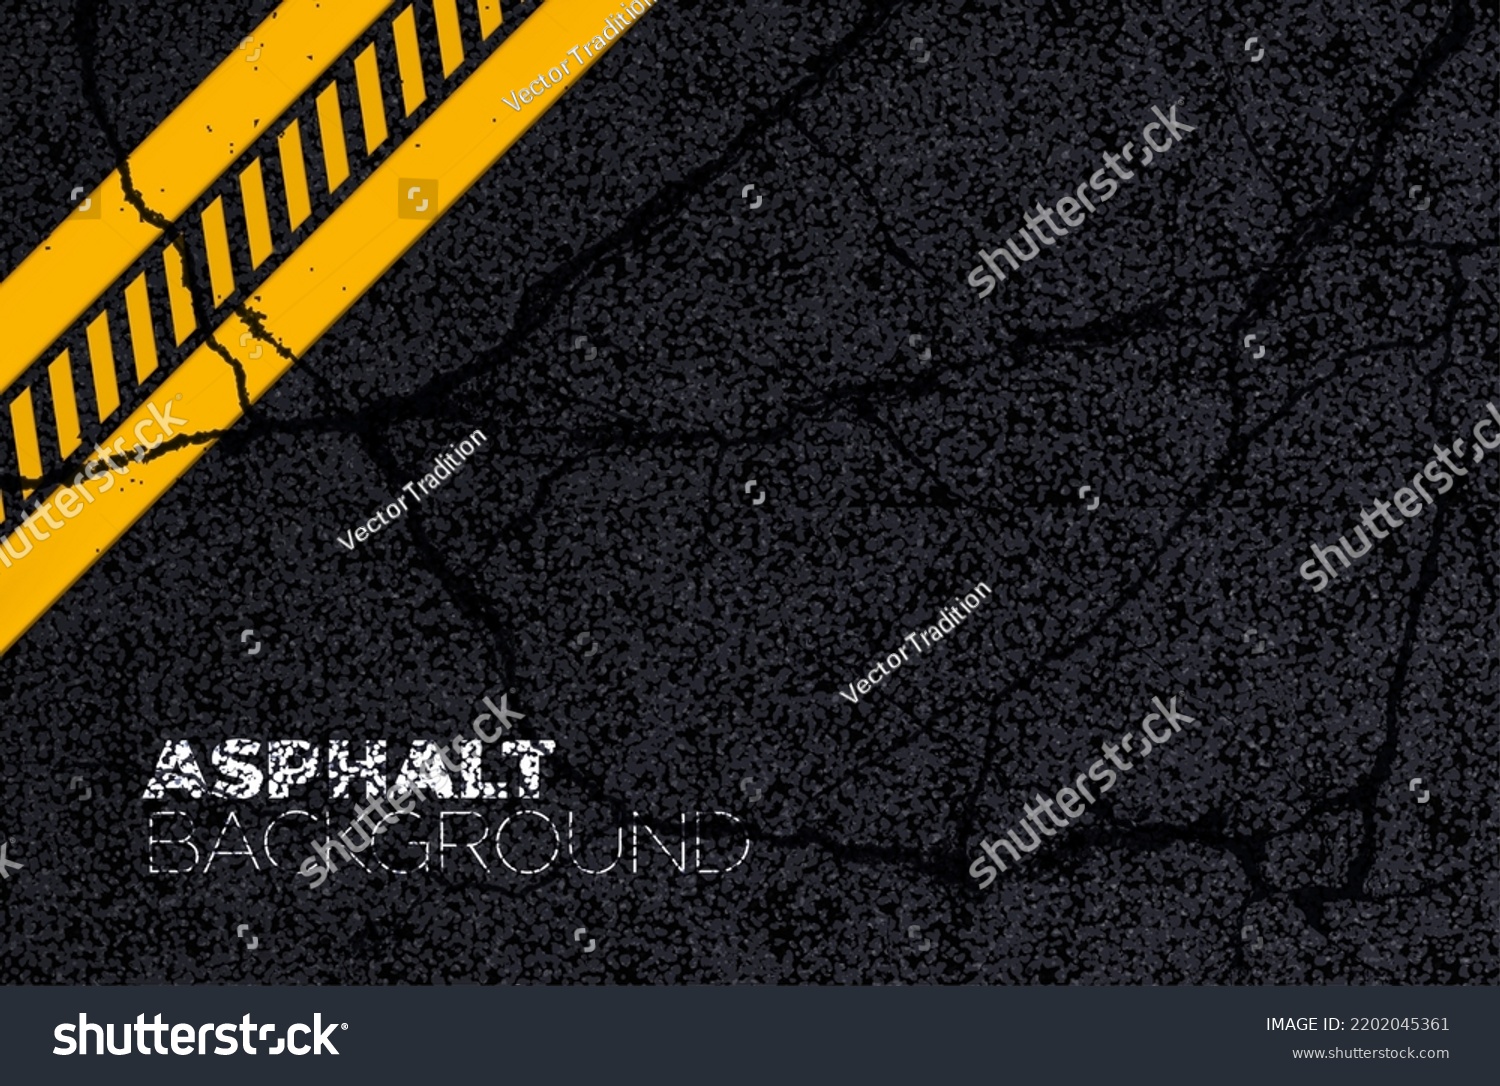 SVG of Asphalt road background texture with cracks pattern, vector yellow street line. Road black tarmac surface, highway bitumen or asphalt grunge pavement with cracked tar stone and traffic lane marking svg